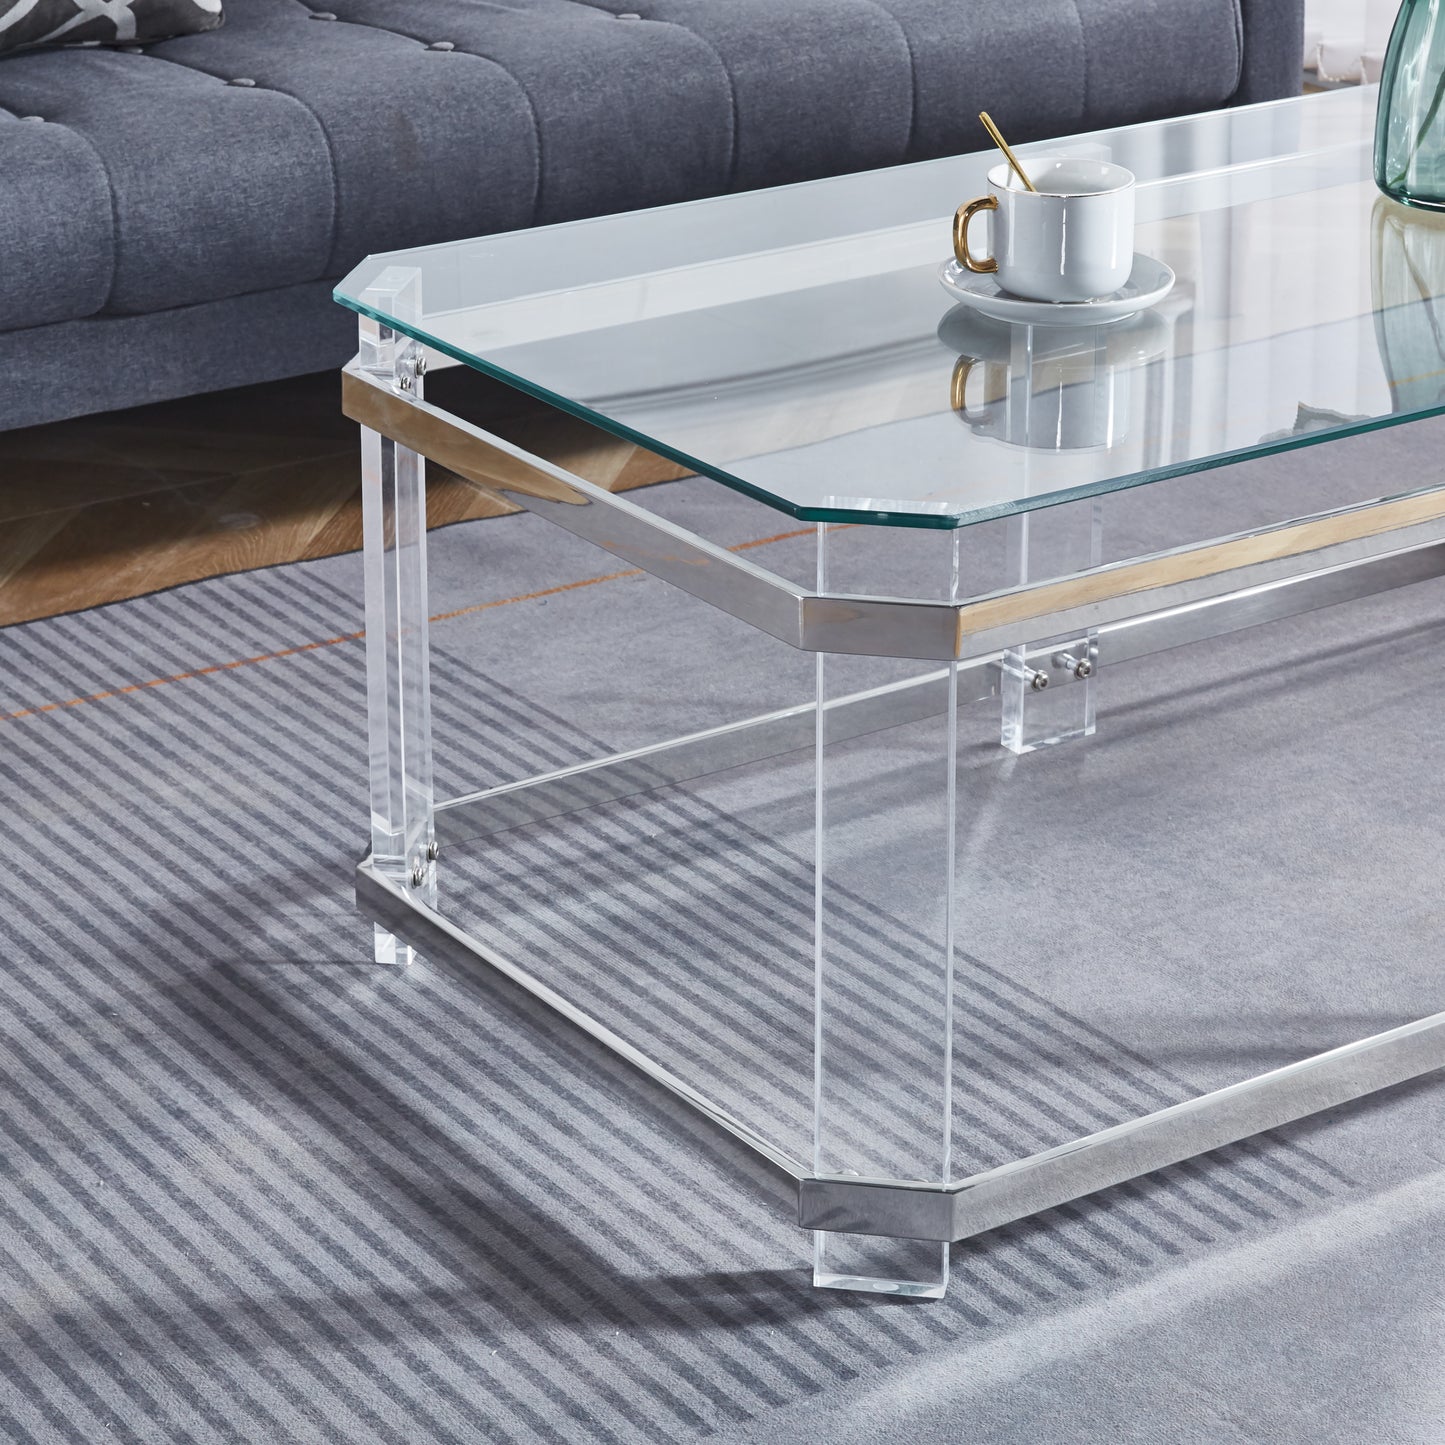 Stylish Silver Stainless Steel Coffee Table With Acrylic Legs and Clear Glass CS-1134